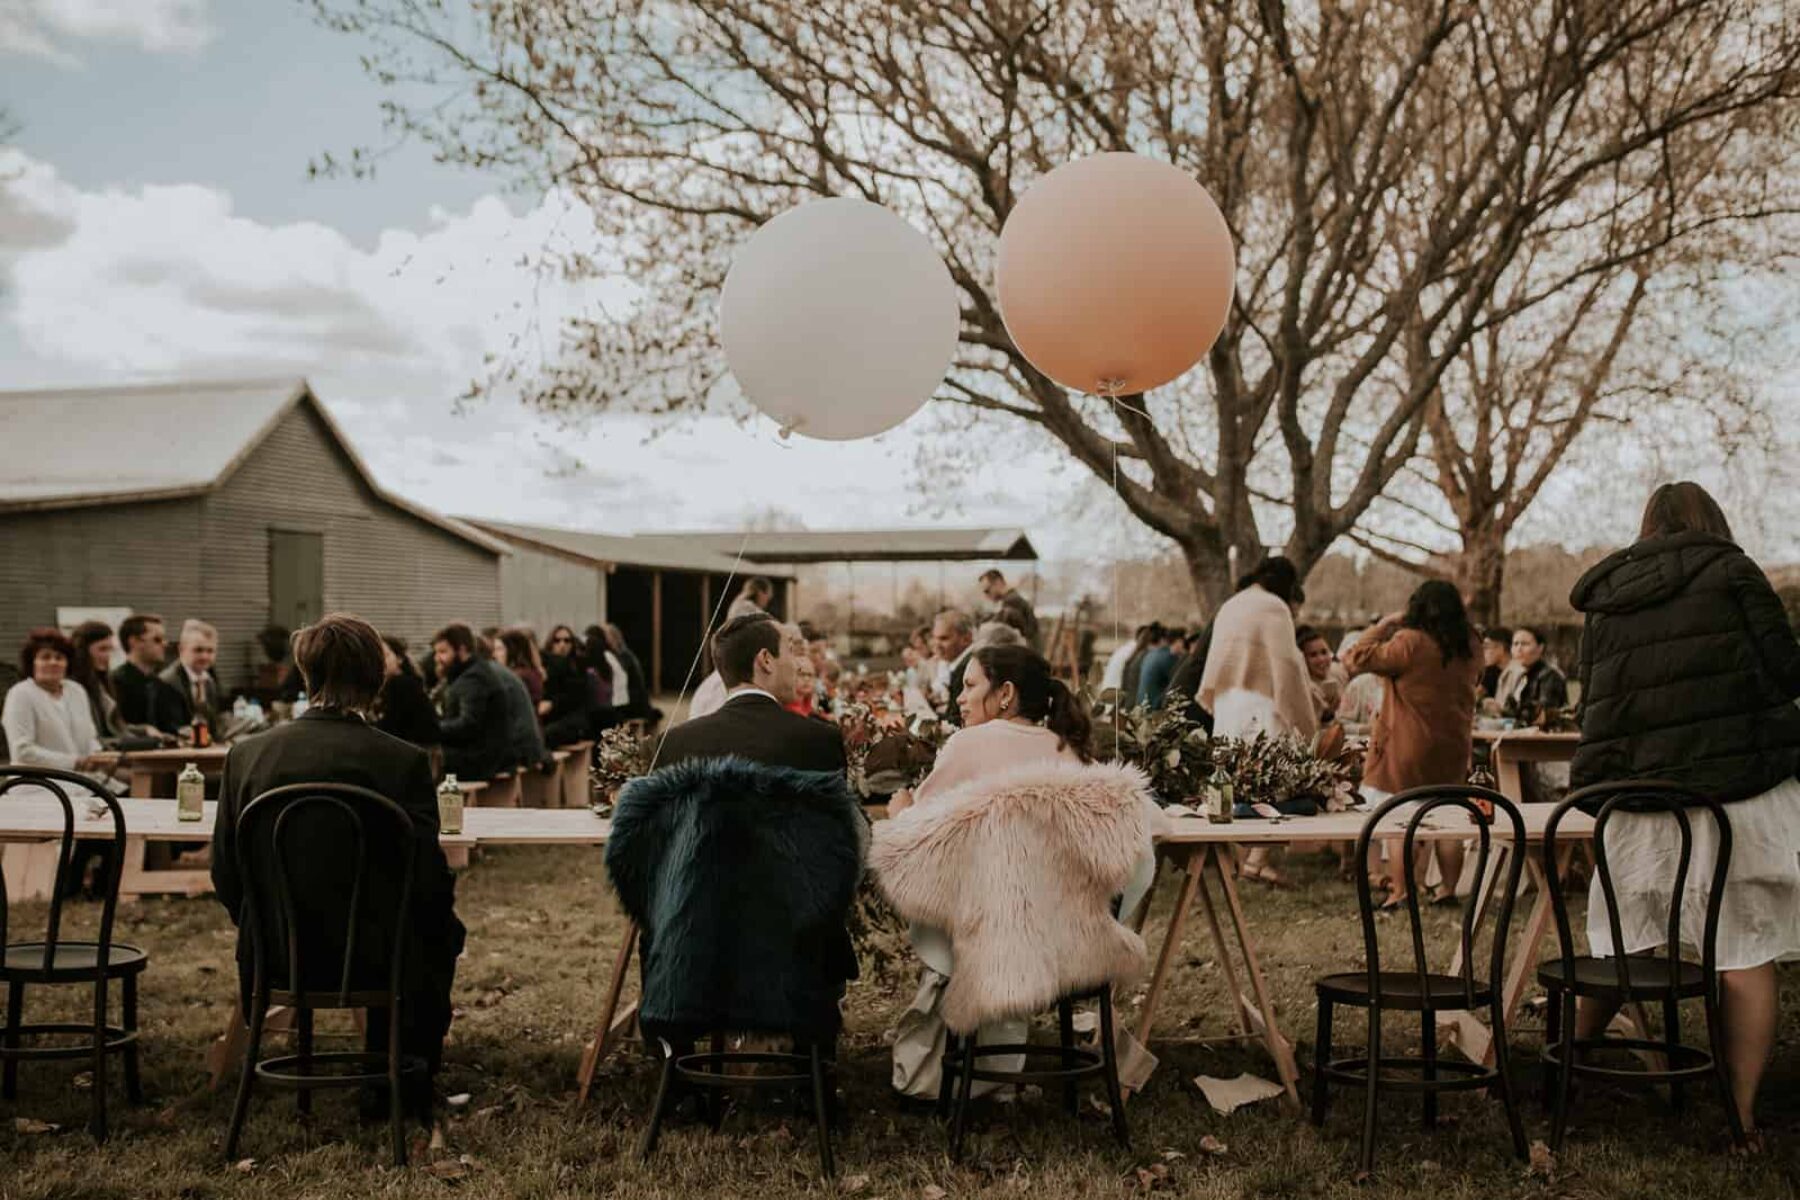 DIY Country wedding in Cambridge NZ - Amy Kate Photography